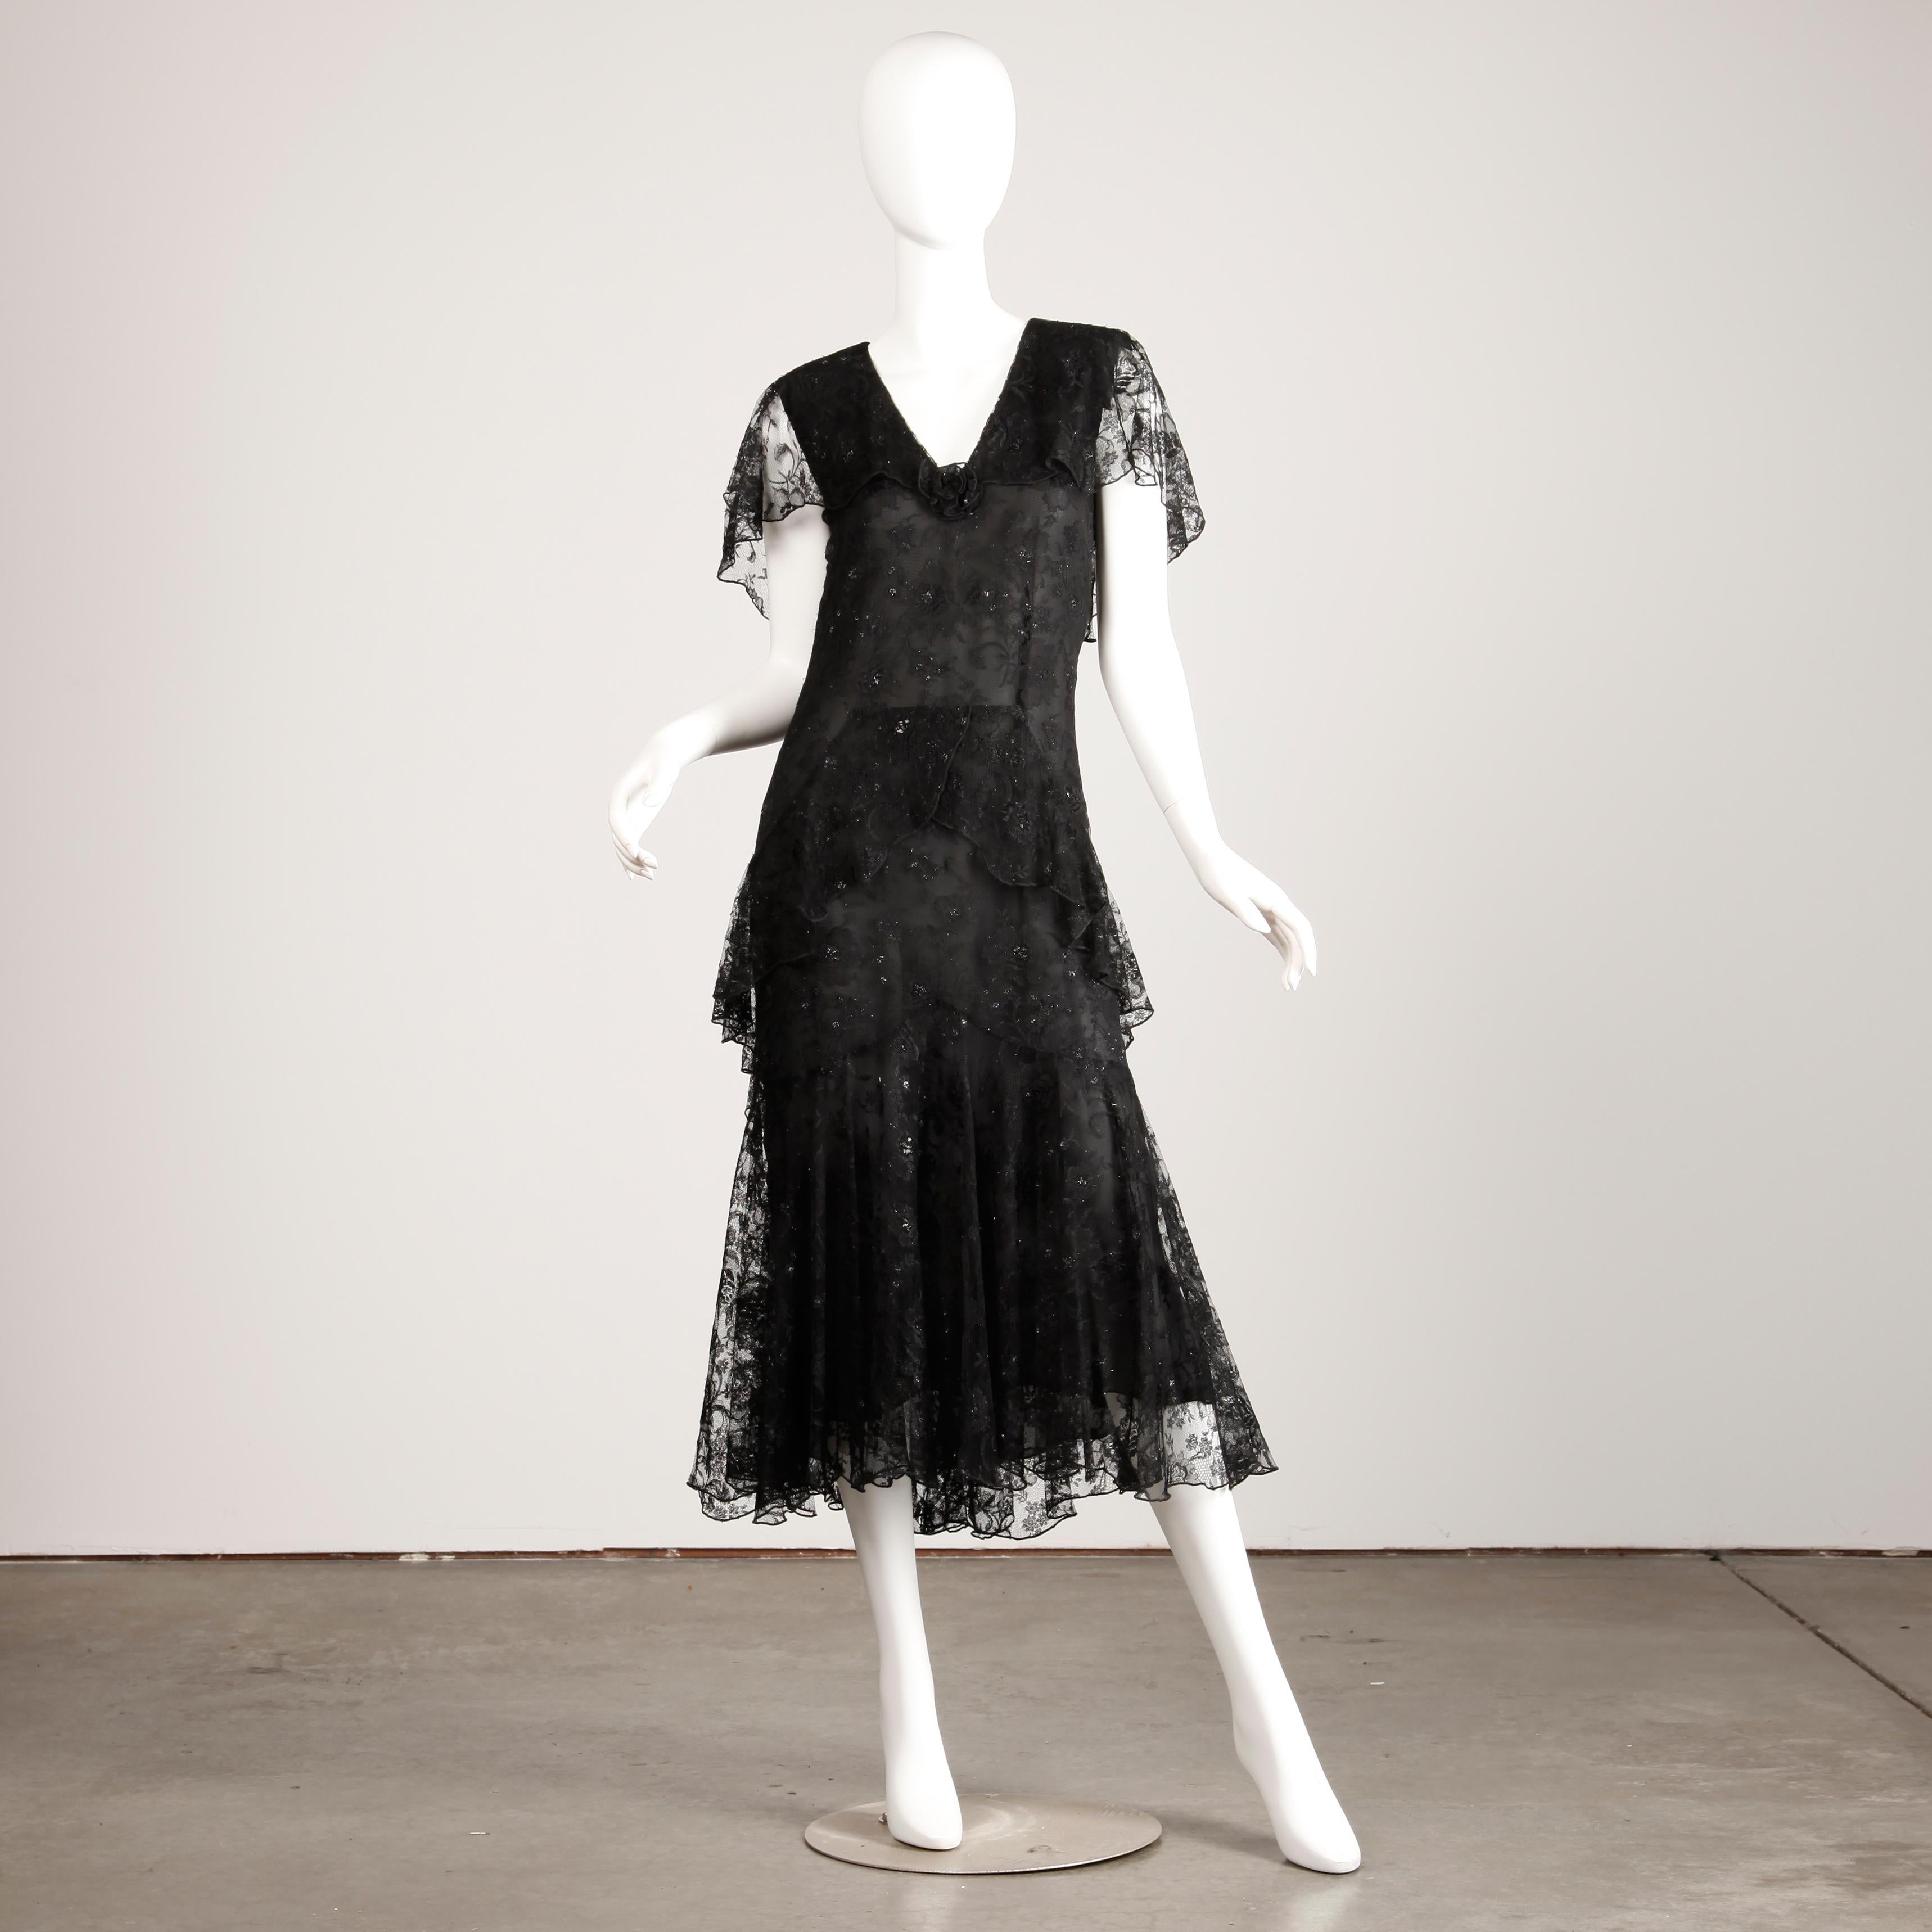 Vintage designer dress by Holly's Harp from the 1980s-90s done in black lace with metallic thread. 1920s Flapper-inspired cut with flutter sleeves and drop waist. Fully lined with single button closure at the back of the neck. There is no marked